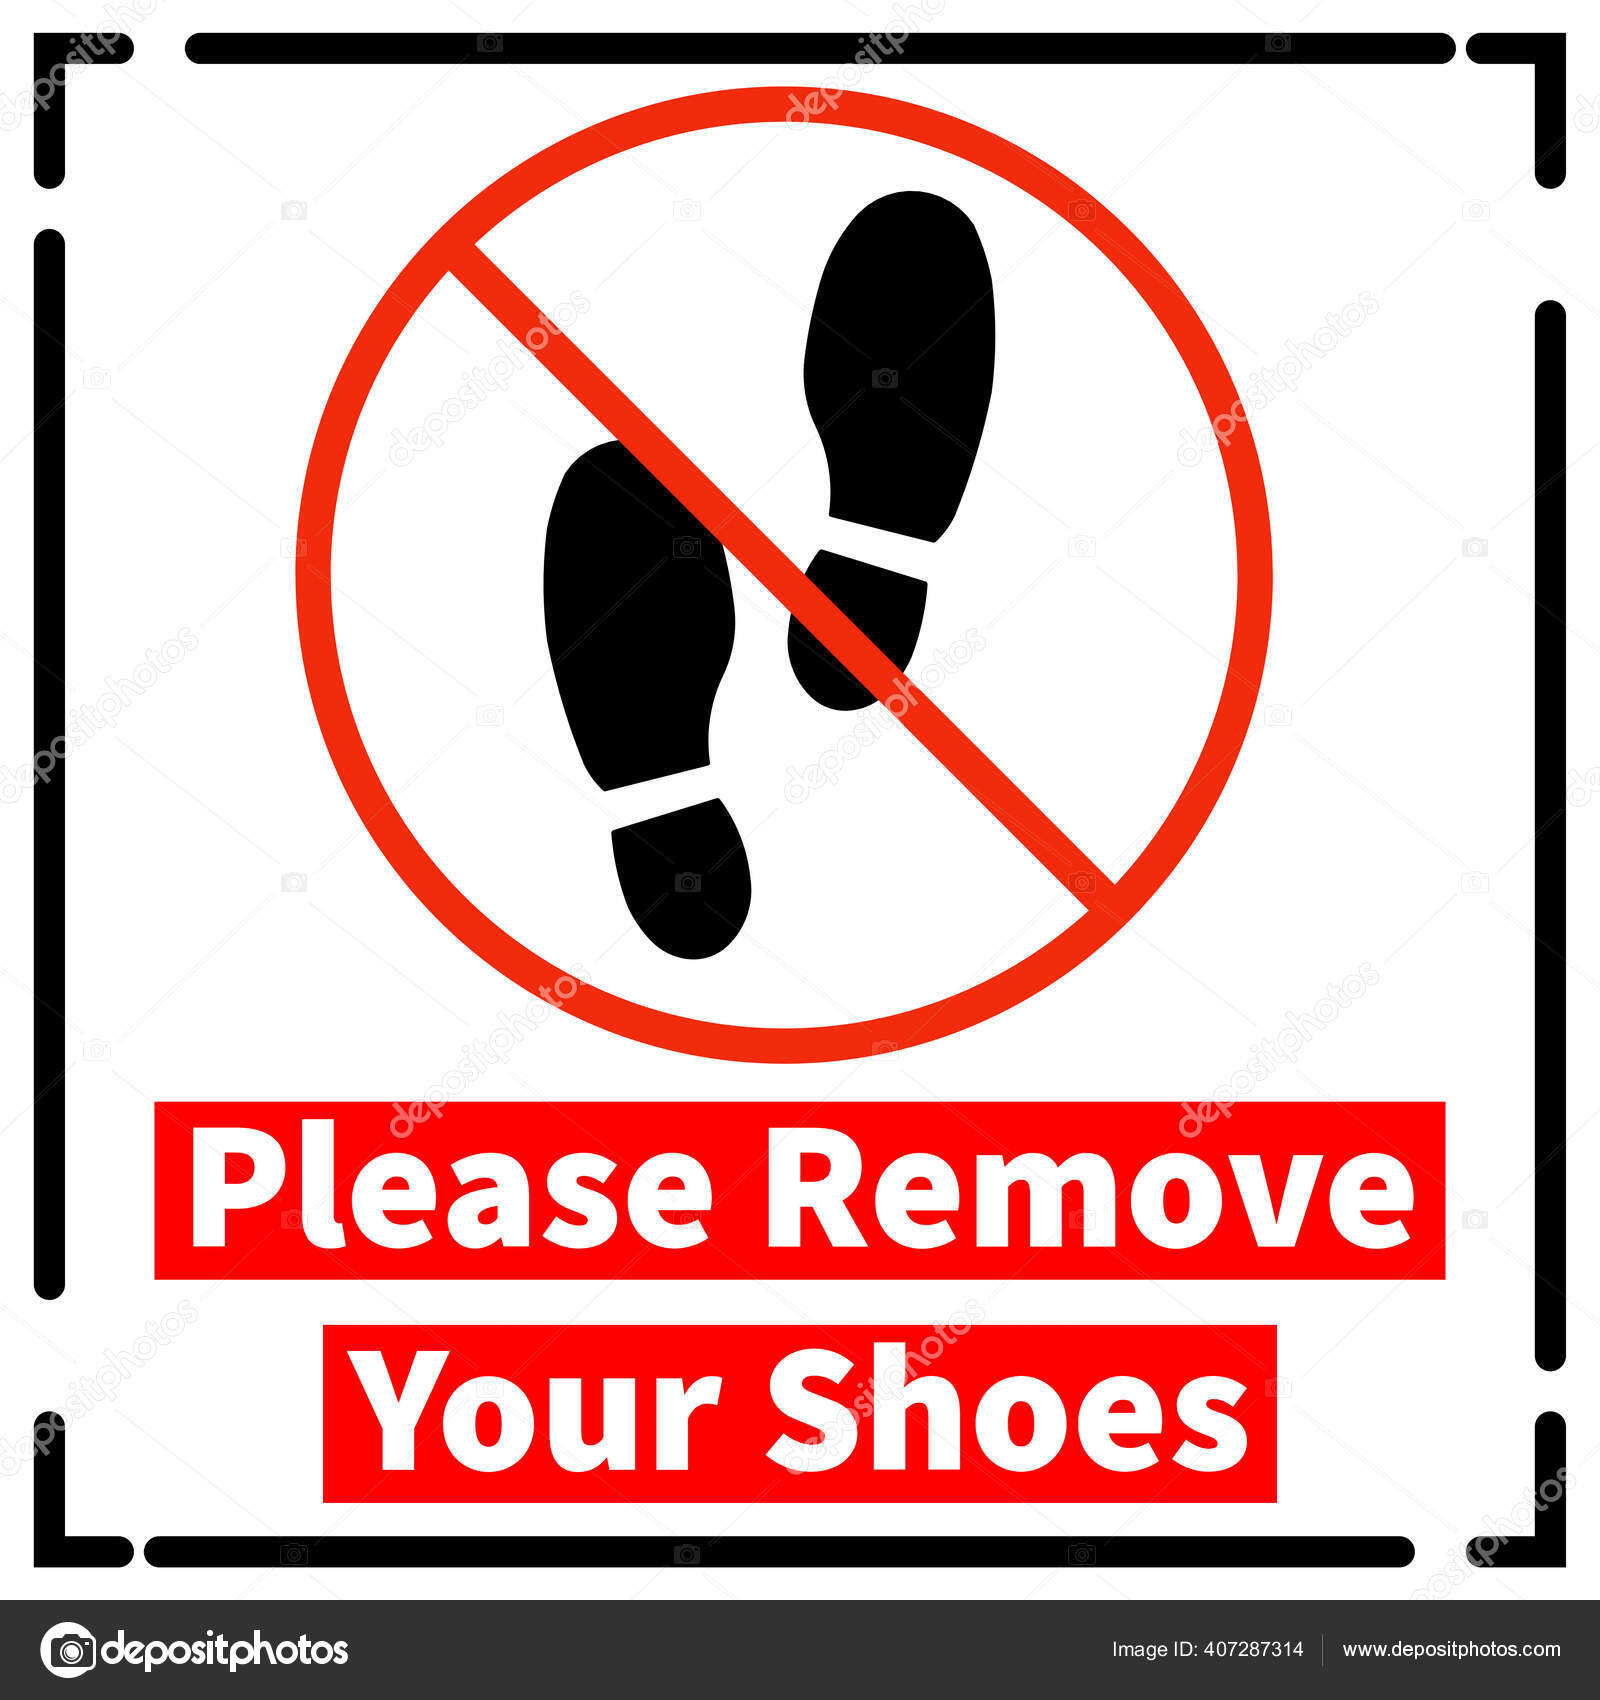 83 Remove shoes Vector Images | Depositphotos